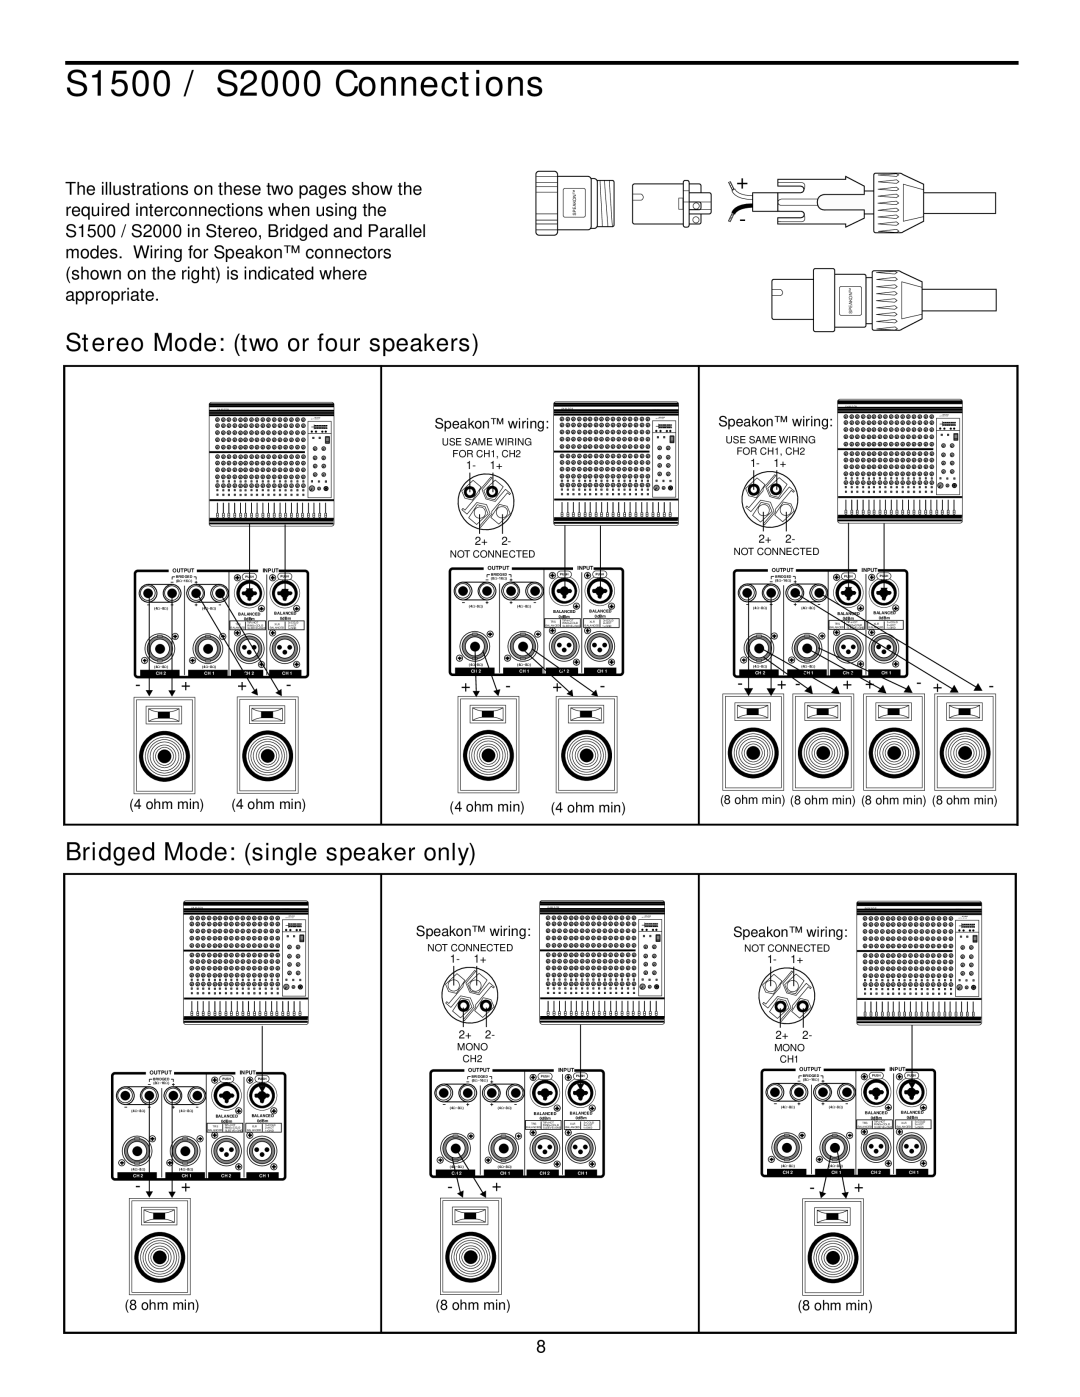 Samson owner manual S1500 / S2000 Connections, Stereo Mode two or four speakers, Bridged Mode single speaker only 